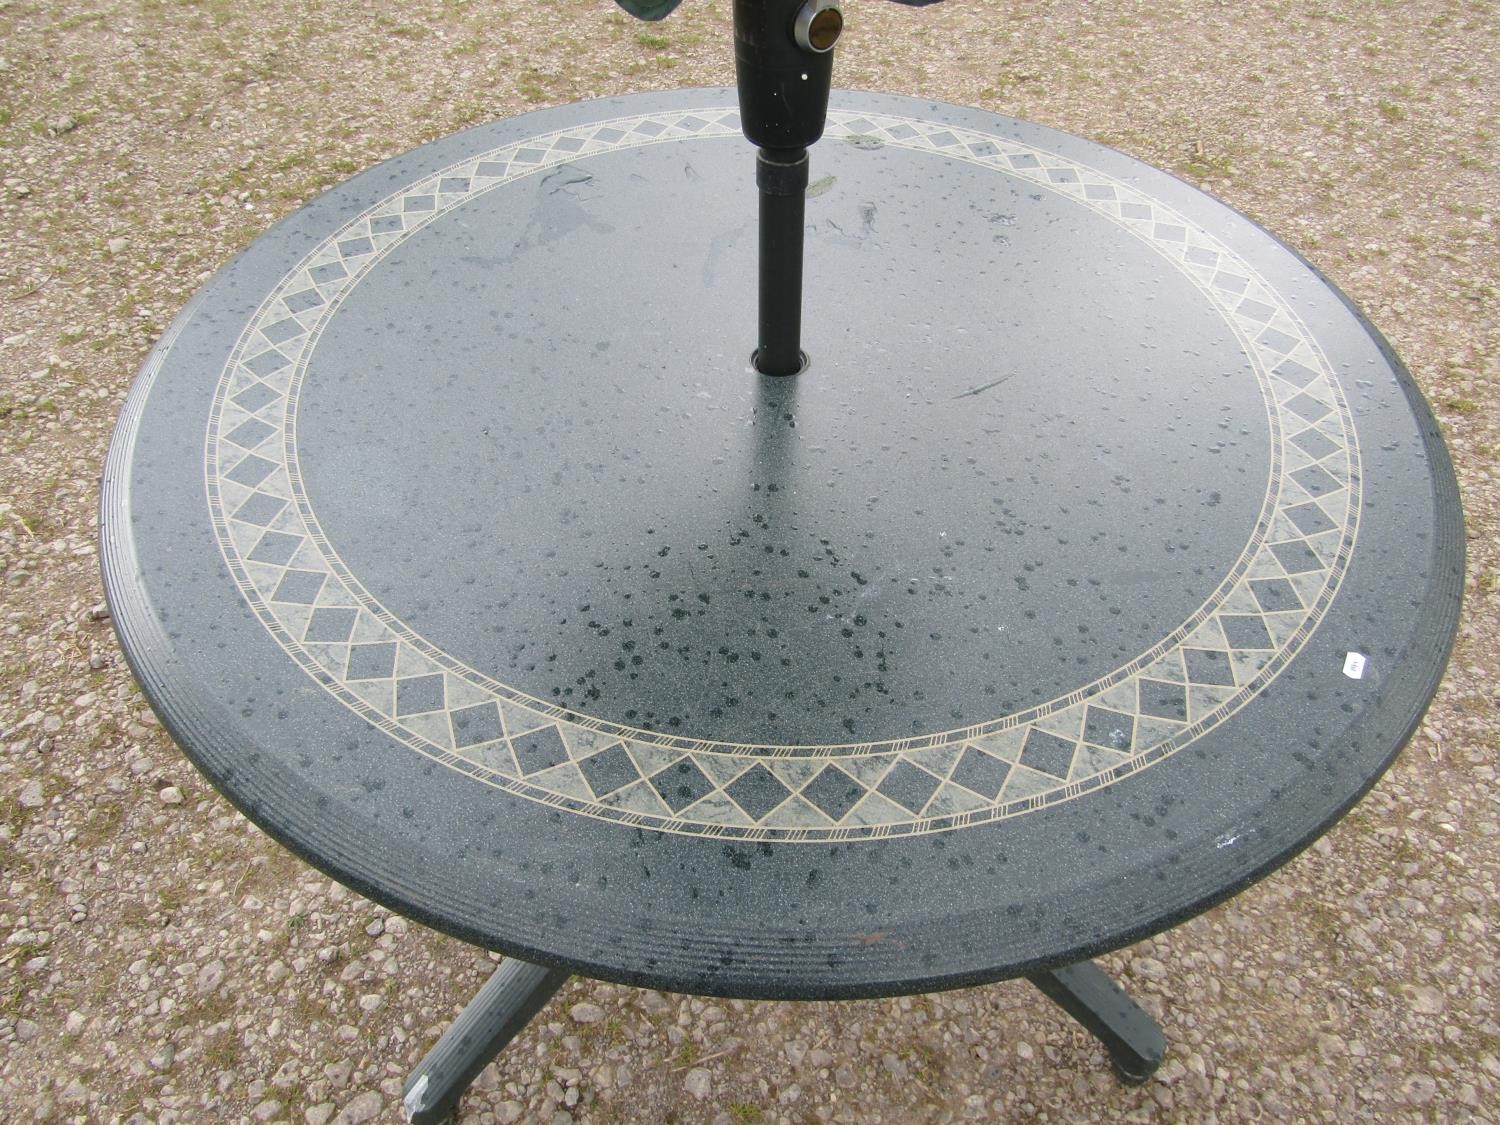 A moulded plastic patio set by Hartman consisting of a circular top table, 120 cm diameter raised on - Image 3 of 7